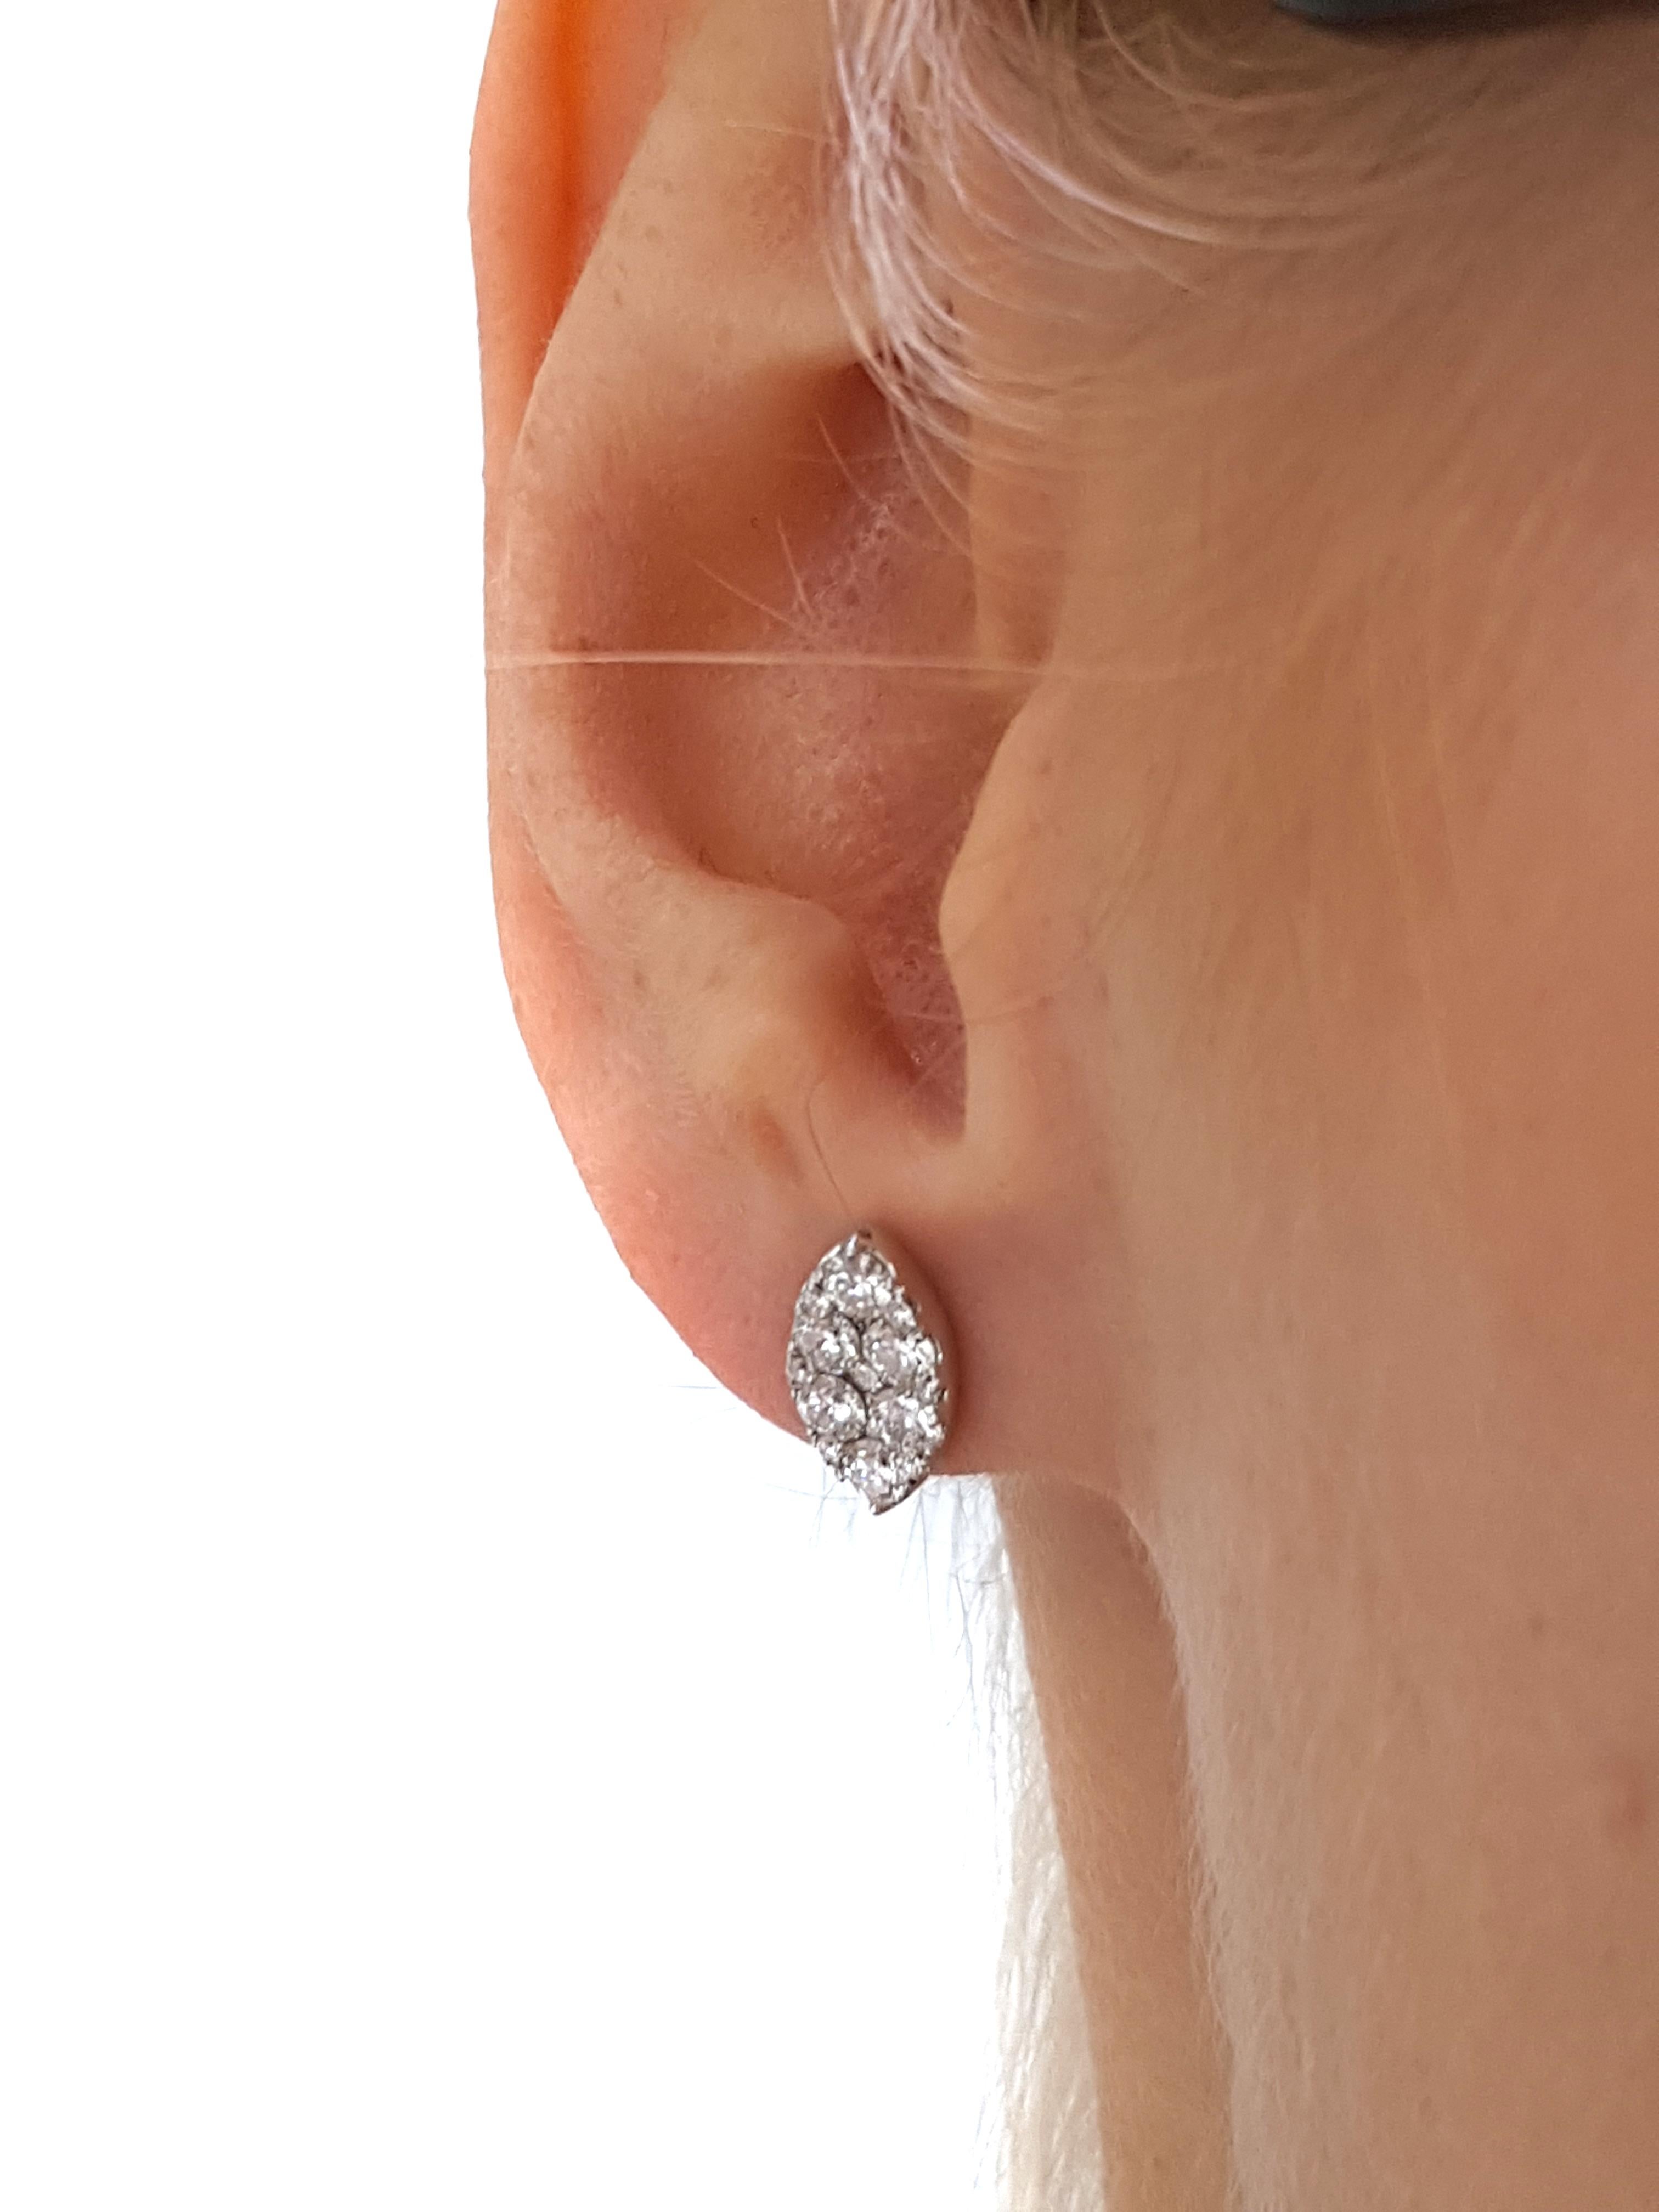 These eye catching elegant Round Brilliant Diamond cluster stud earrings featuring a white color H clarity SI sparkling Diamonds set in 18 Karat White Gold. These Marquise shaped pave set cluster studs have a total diamond weight of 1.00 Carat and a